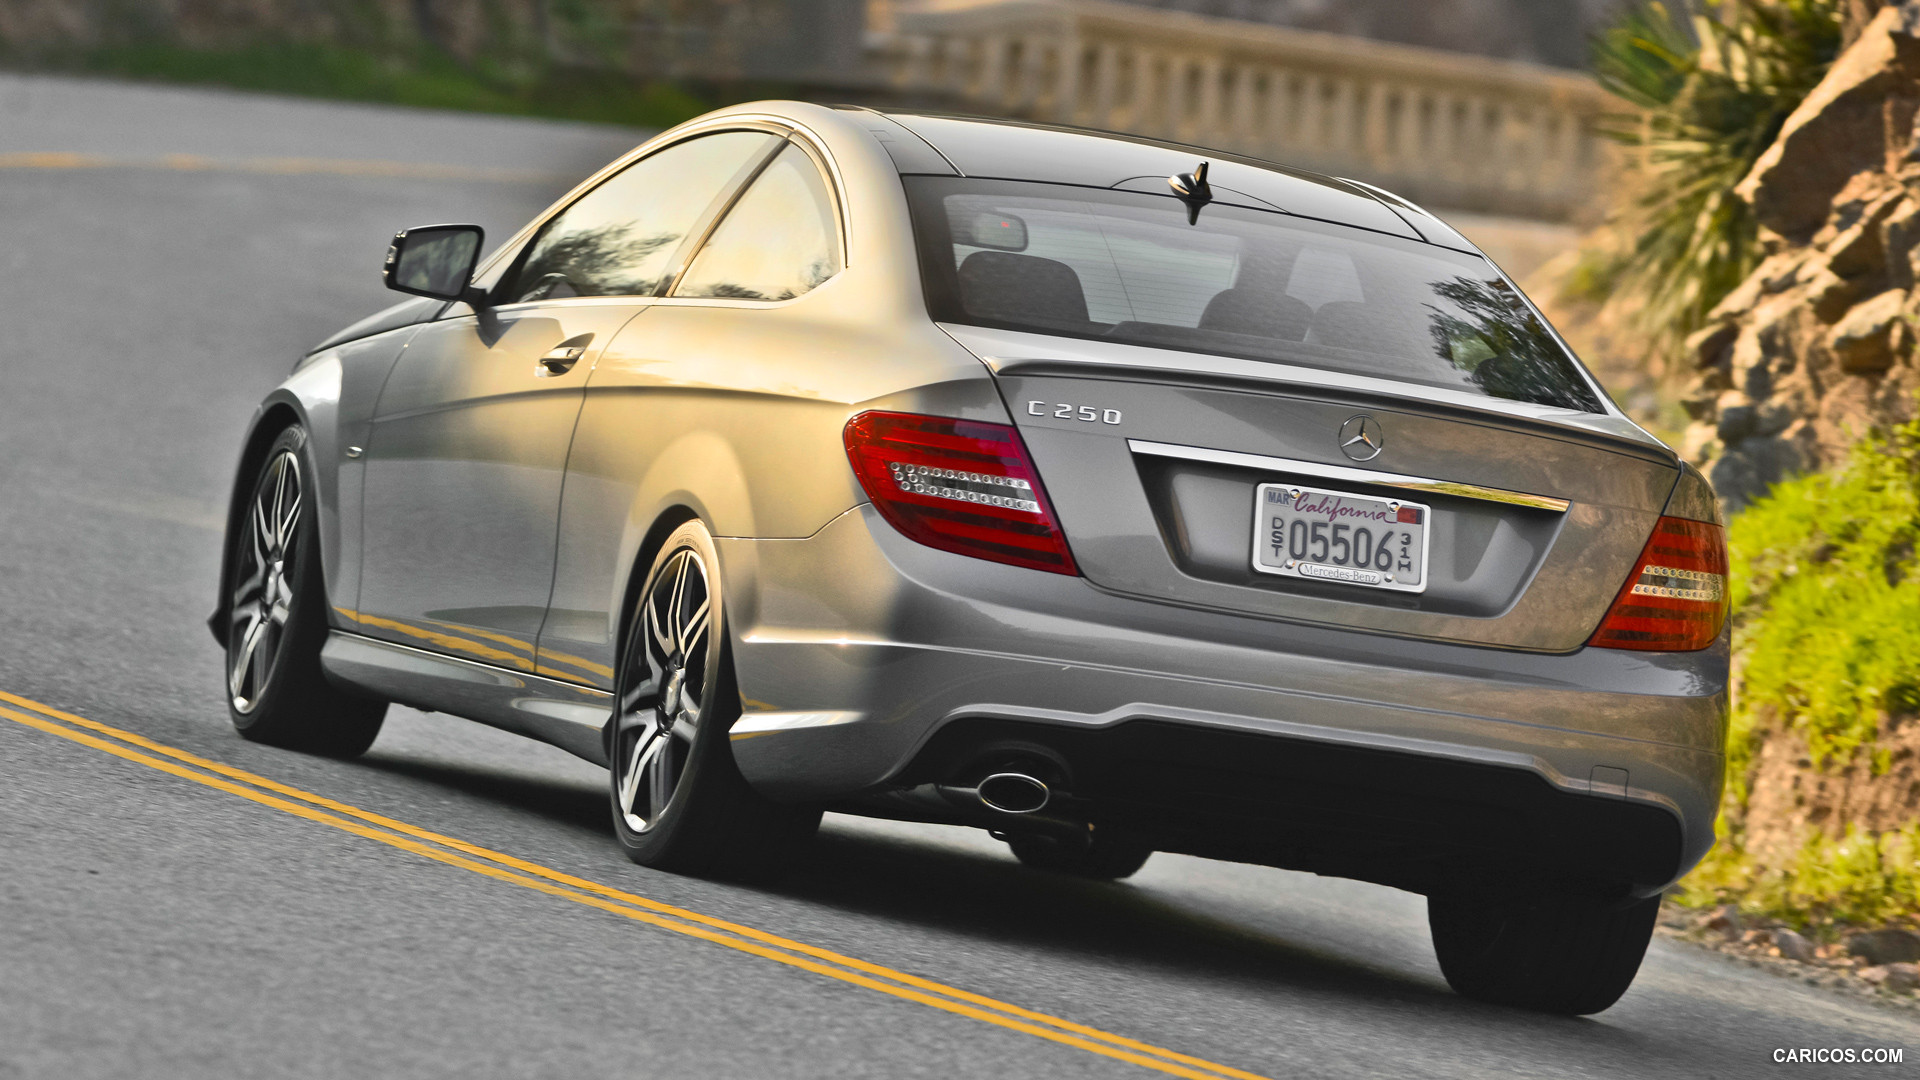 Mercedes-Benz C250 Coupe (2013)  - Rear, #60 of 86